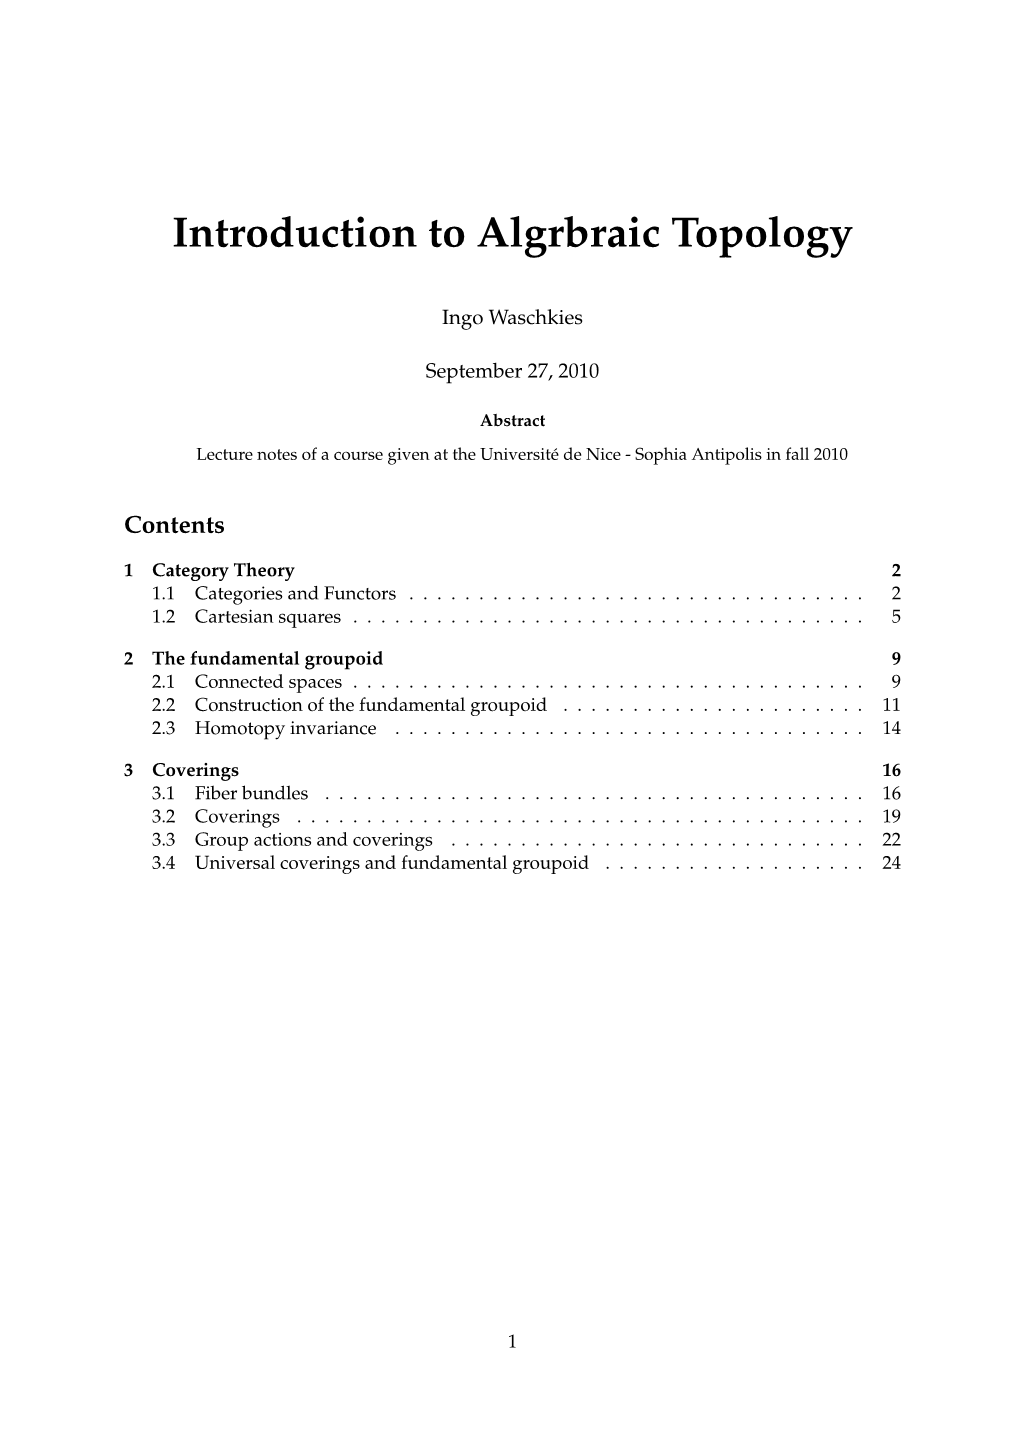 Introduction to Algrbraic Topology